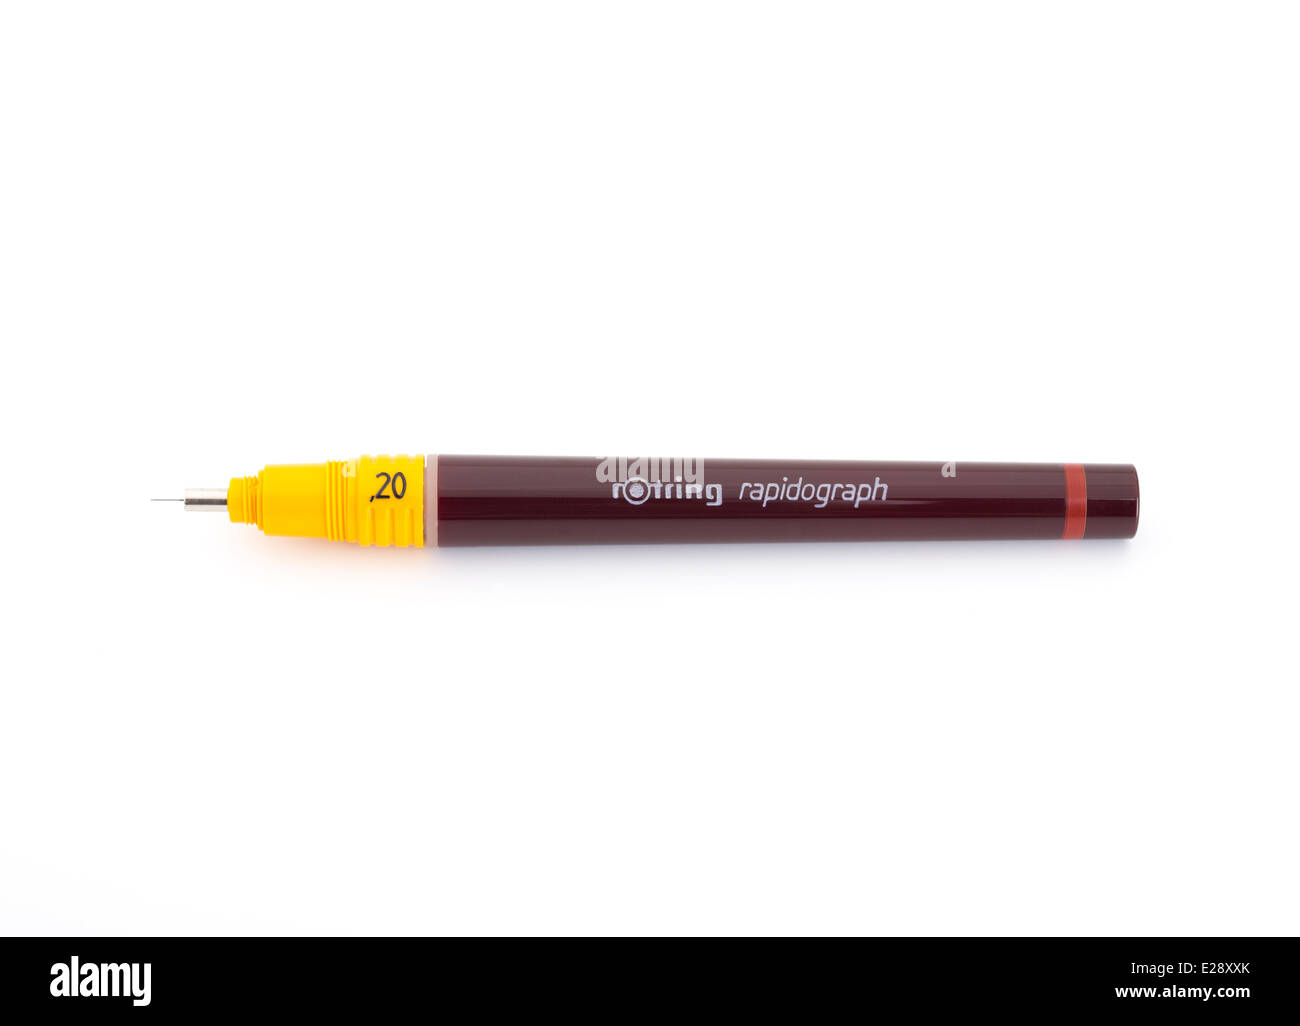 Technical Pens Isolated On White Background Stock Photo - Download Image  Now - iStock